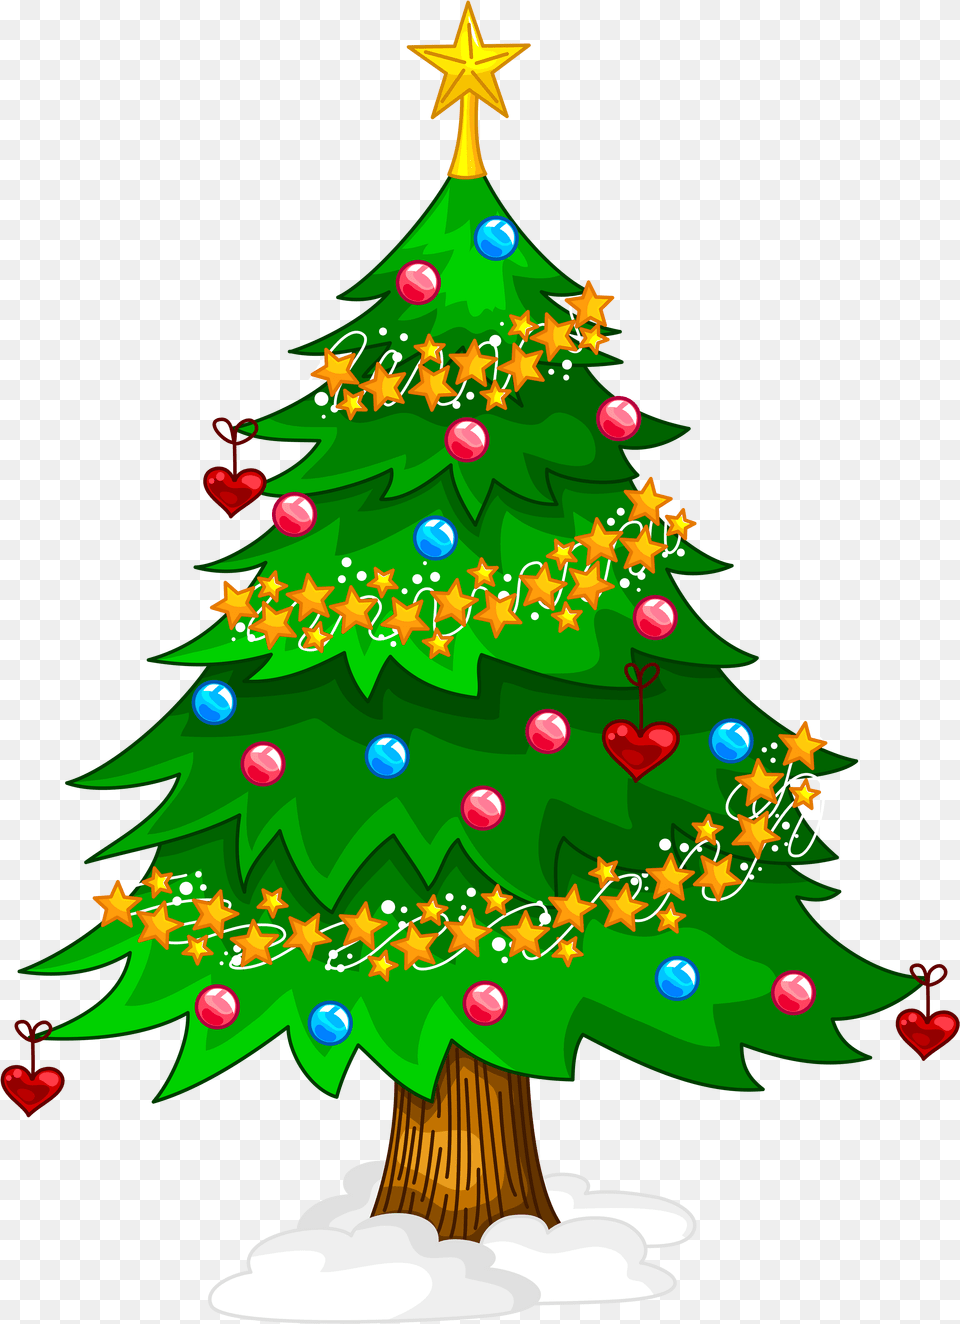 Transparent Background Xmas Tree Clipart Christmas Backgrounds, Plant, Christmas Decorations, Festival, Christmas Tree Free Png Download